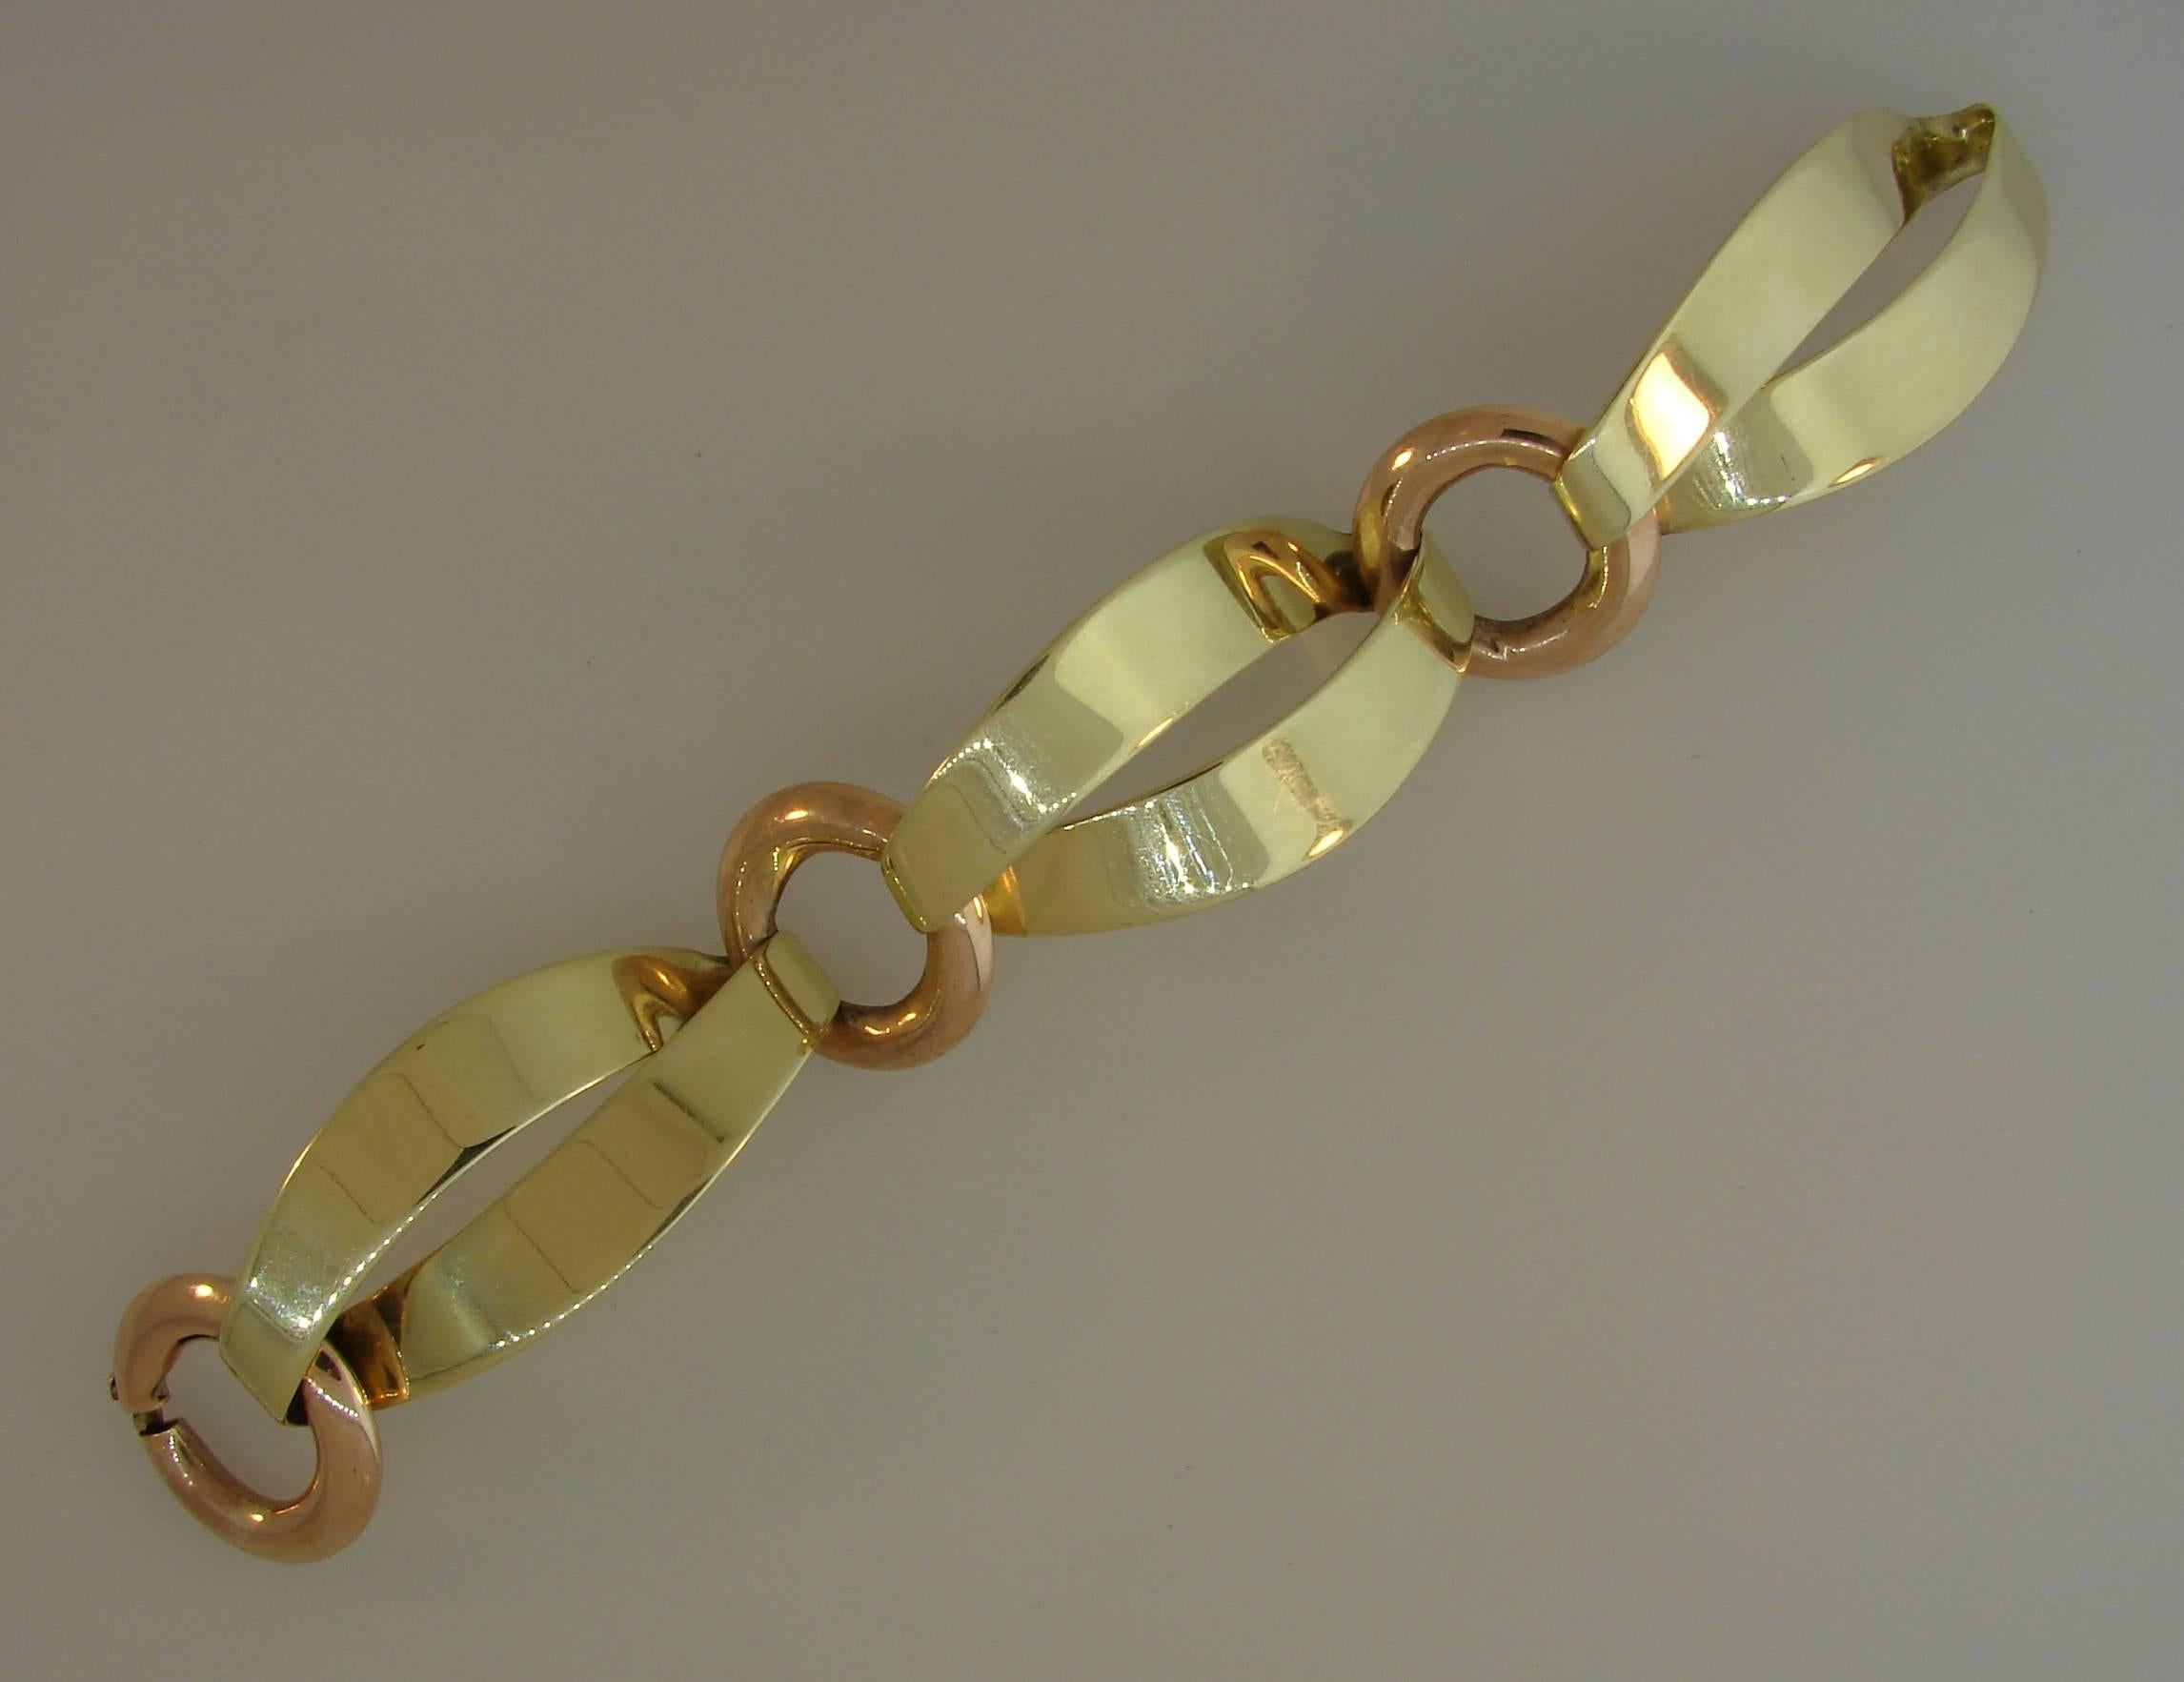 Fun and stylish bracelet created by Cartier in the 1940's. Alternating contrast links, perfect proportions and combination of yellow gold and rose gold are the highlights of this fabulous bracelet. Sharp, elegant and wearable, it is a great addition